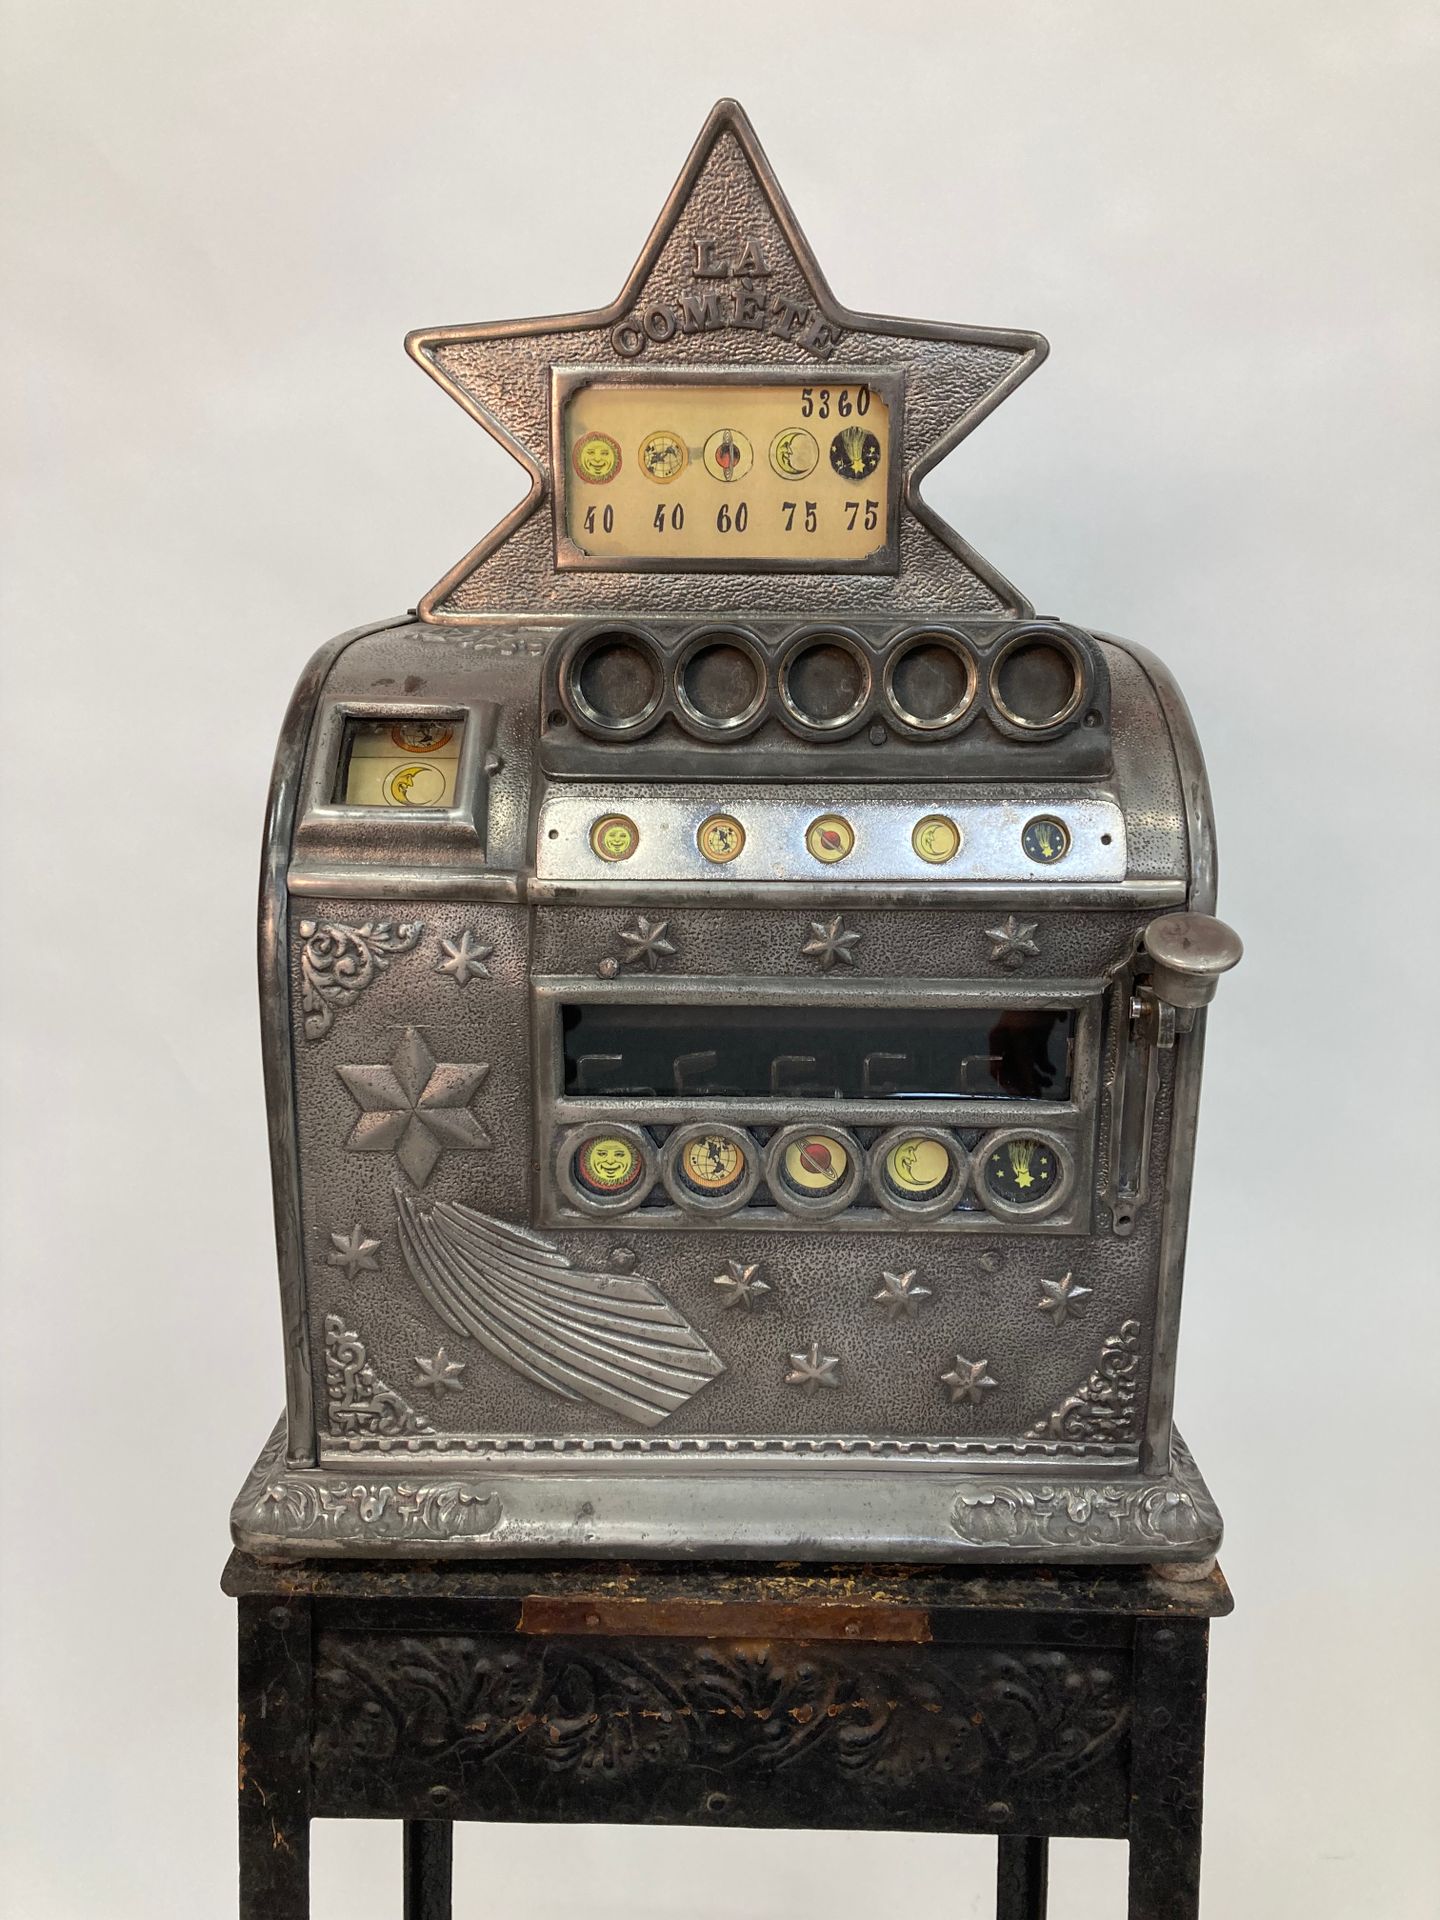 Null "The Comet", Slot machine, five cast iron entrances, USA, first part of the&hellip;